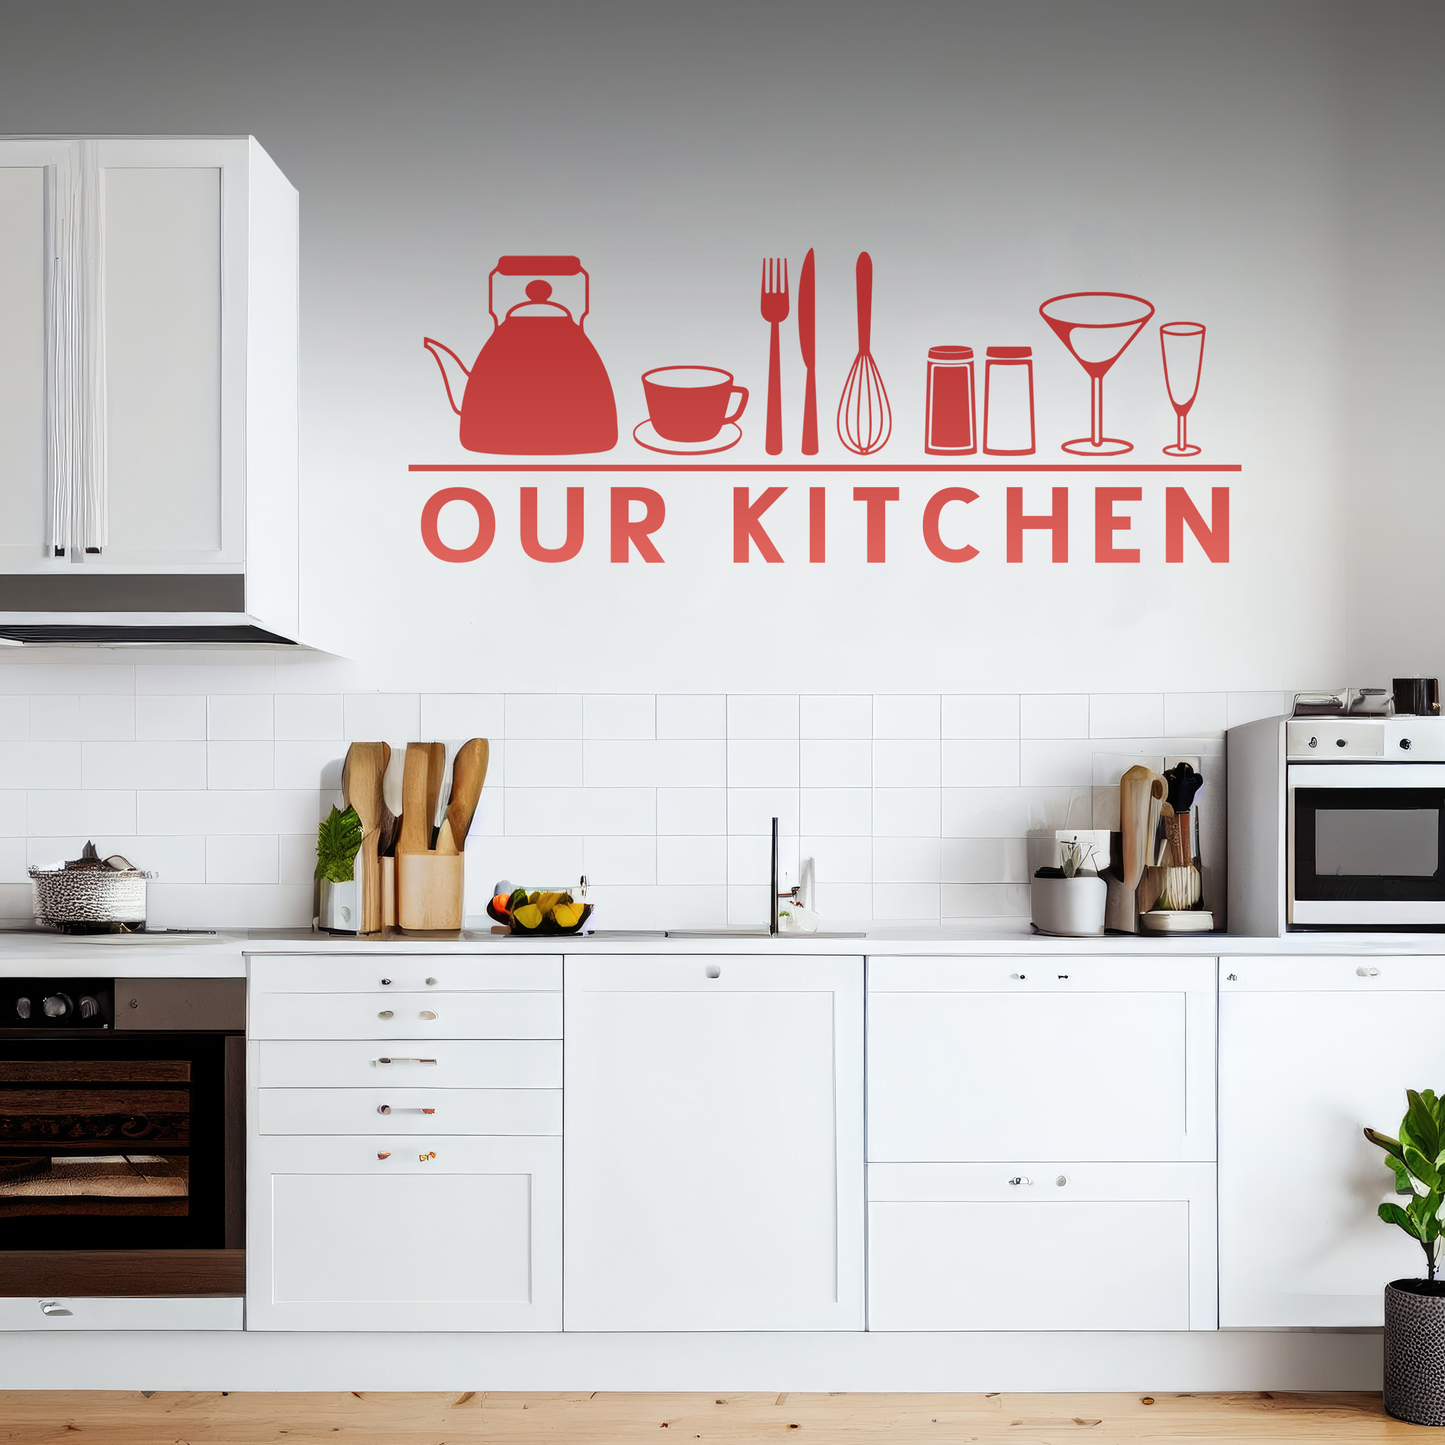 Our Kitchen Wall Sticker Decal